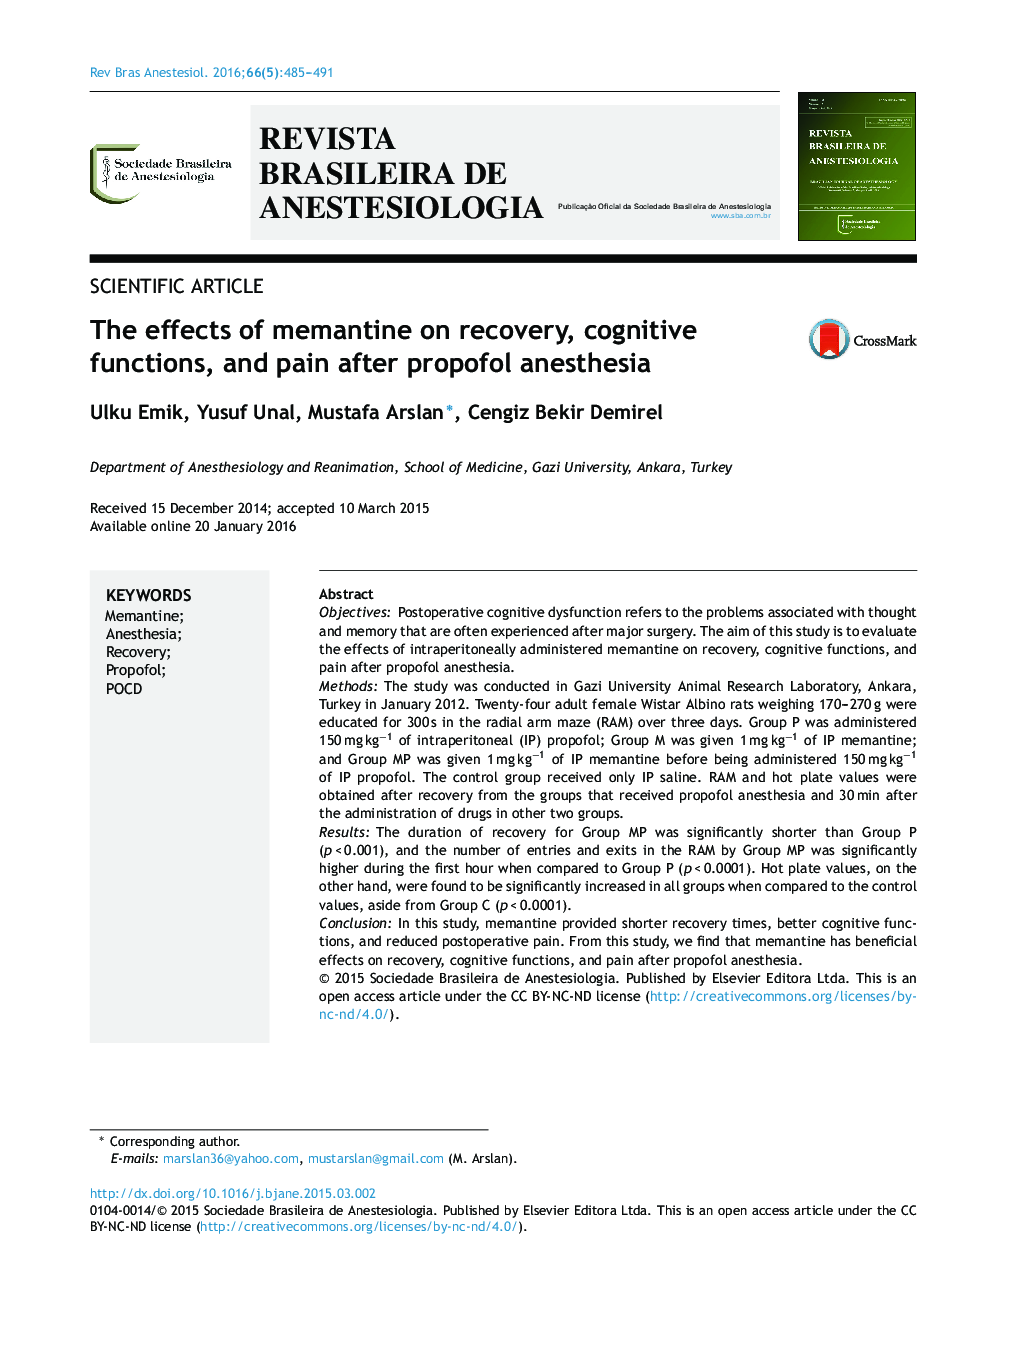 The effects of memantine on recovery, cognitive functions, and pain after propofol anesthesia